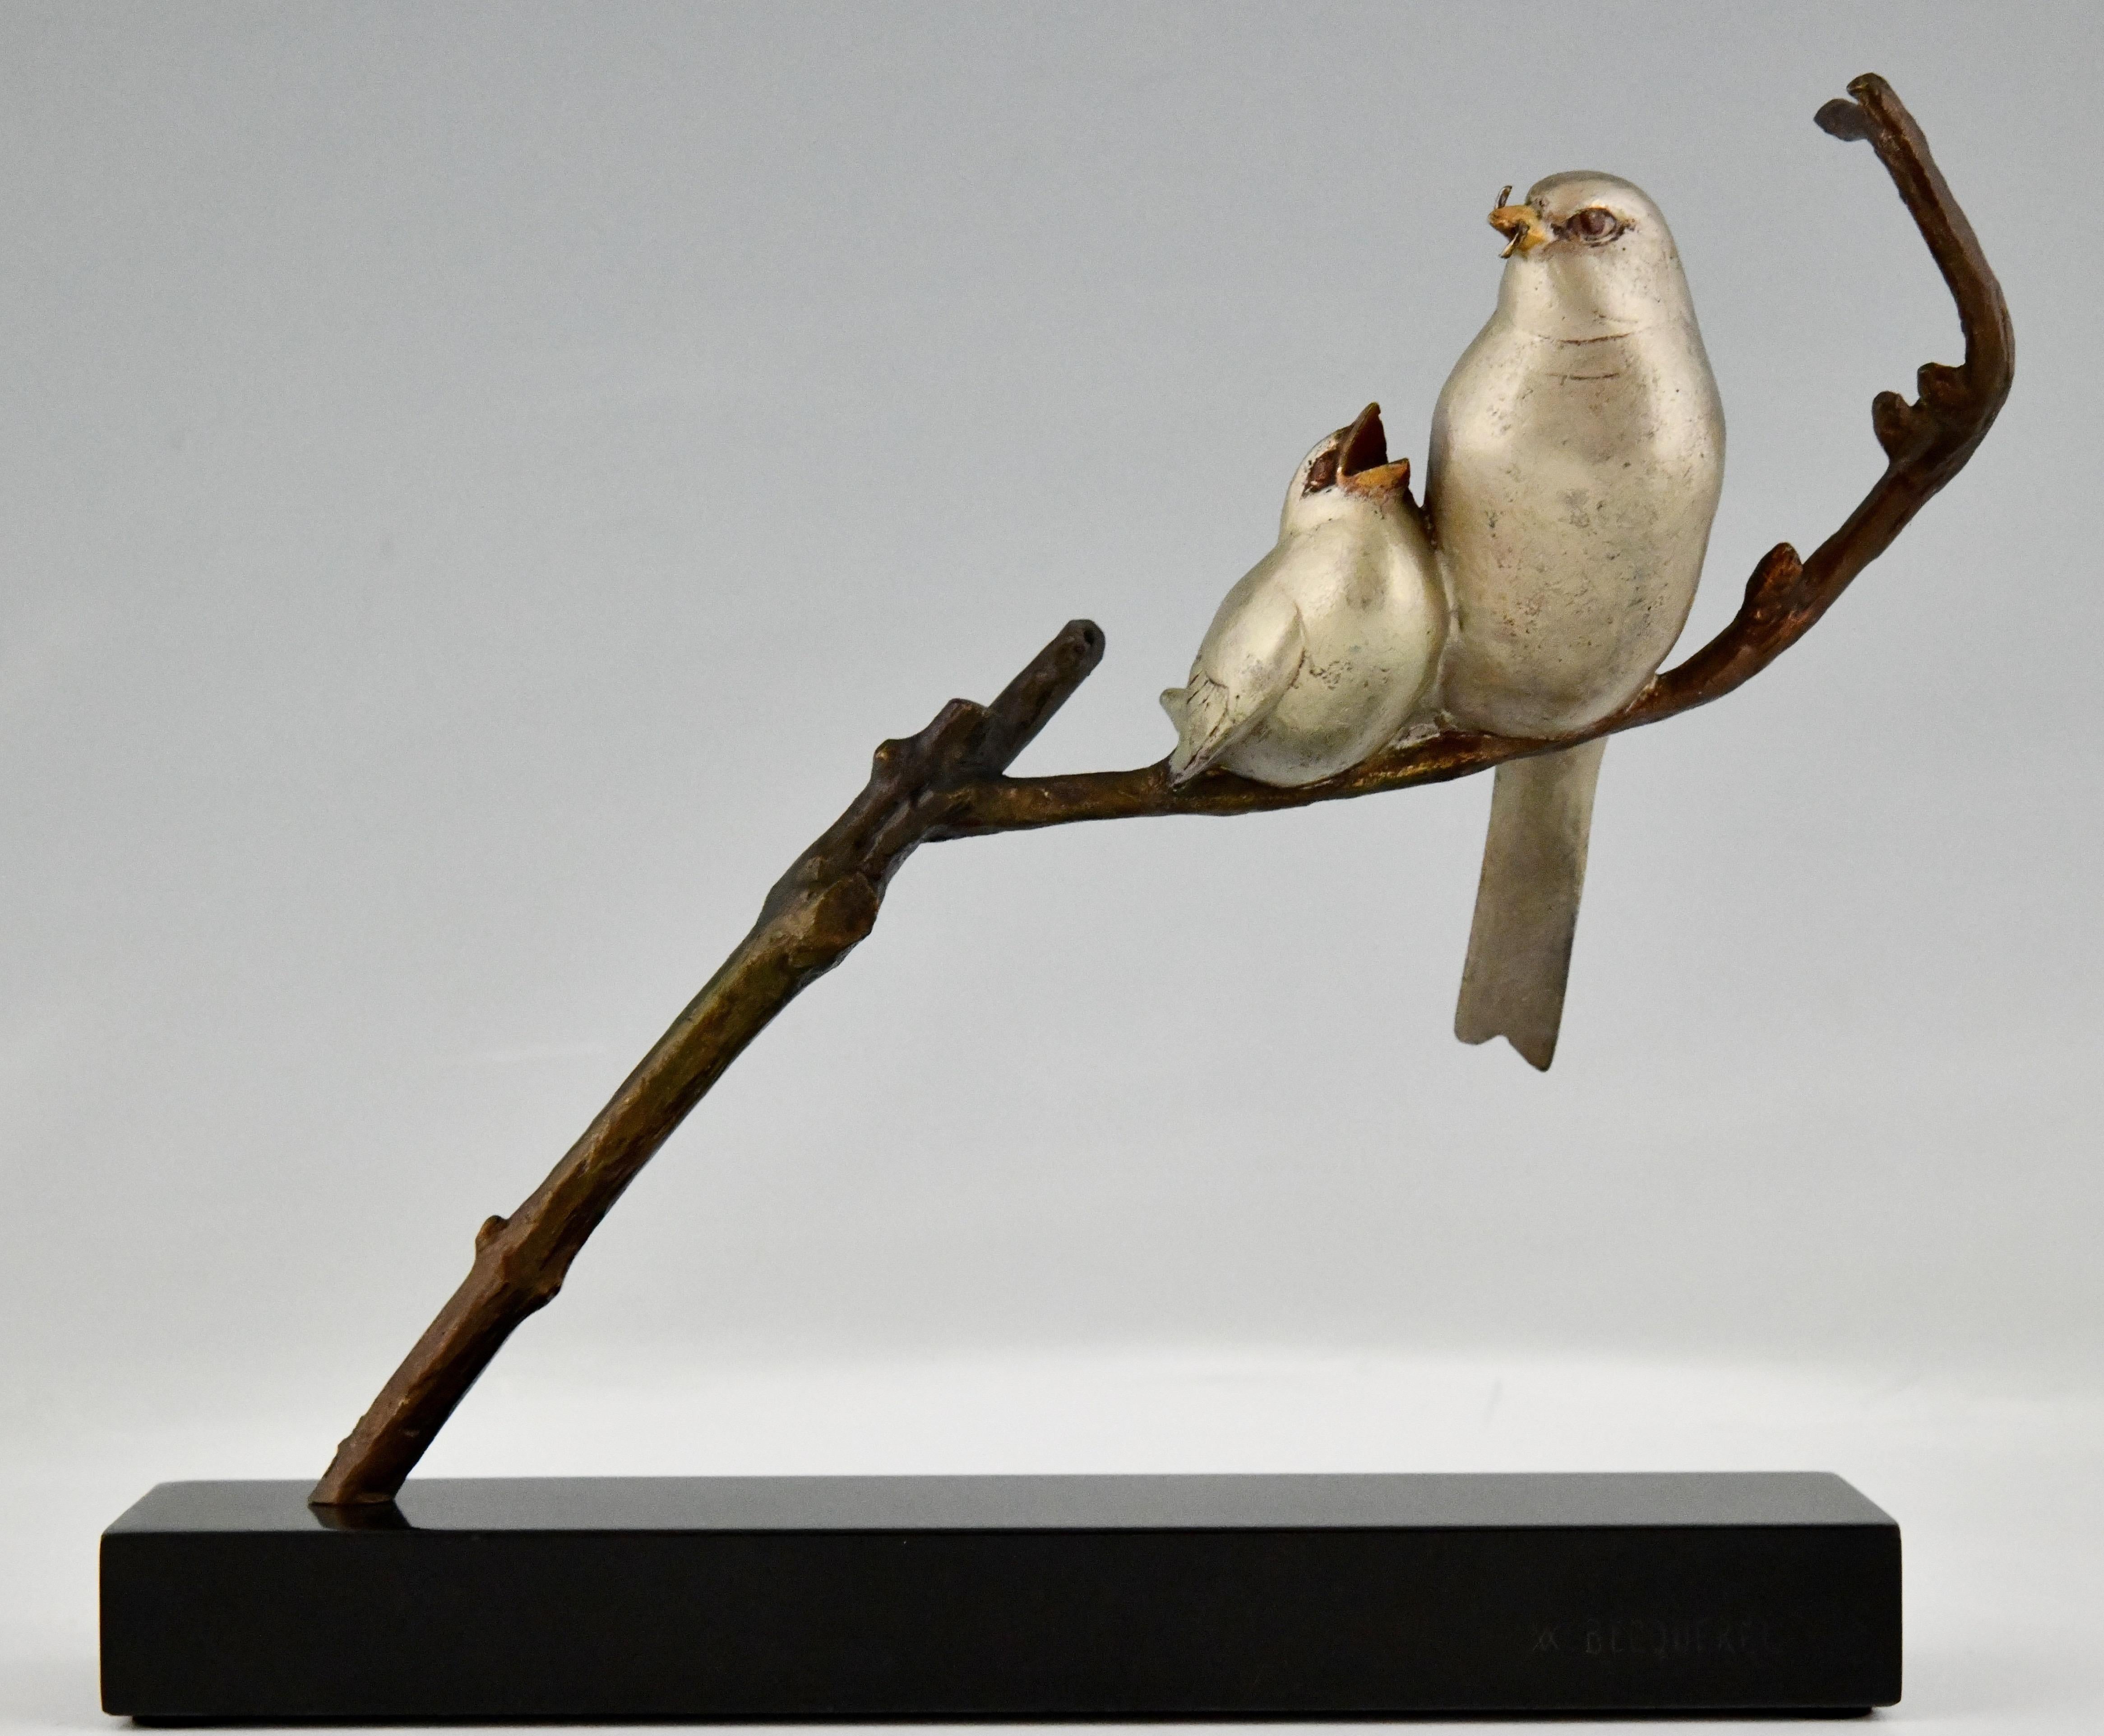 Art Deco sculpture birds on a branch signed by André Vincent Becquerel.
Bronze with silver patina mounted on a Belgian Black marble base.
France 1930. 
Literature:
Art Deco and other figures, Brian Catley, Antique collectors club.
Animals in